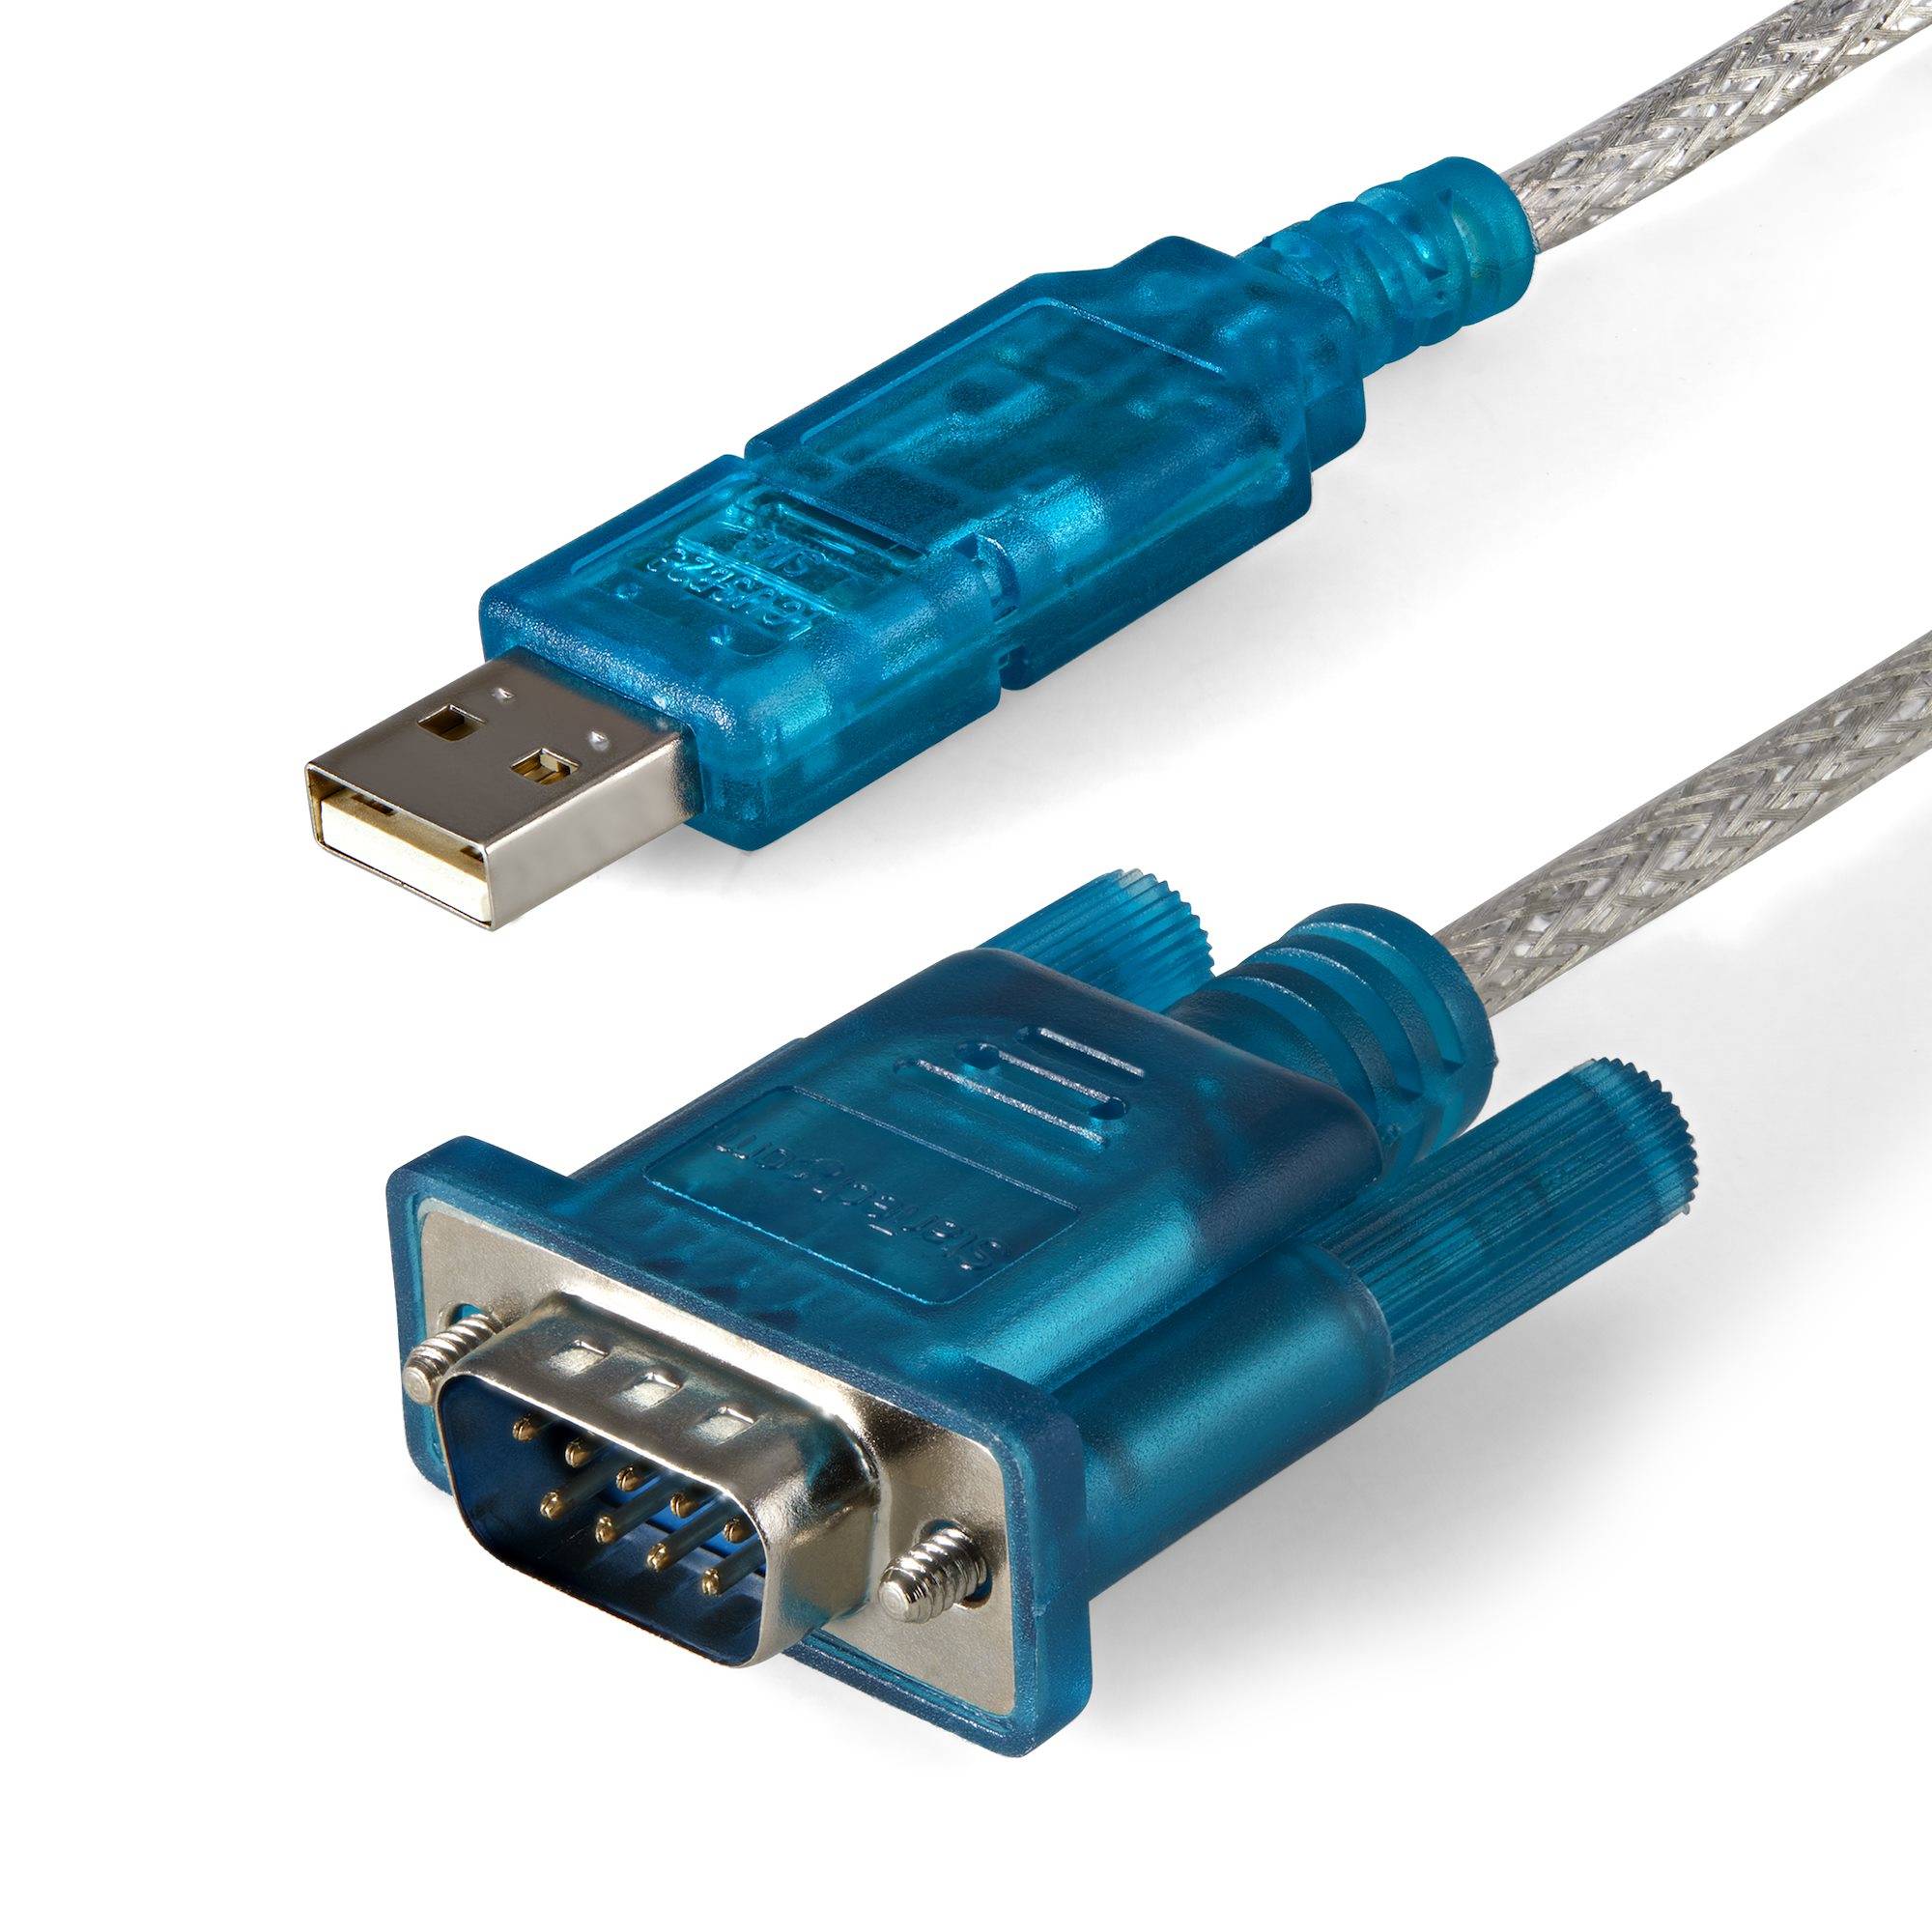 Rca Informatique - Image du produit : USB TO SERIAL ADAPTER CABLE USB TO RS232 DB9 M/M